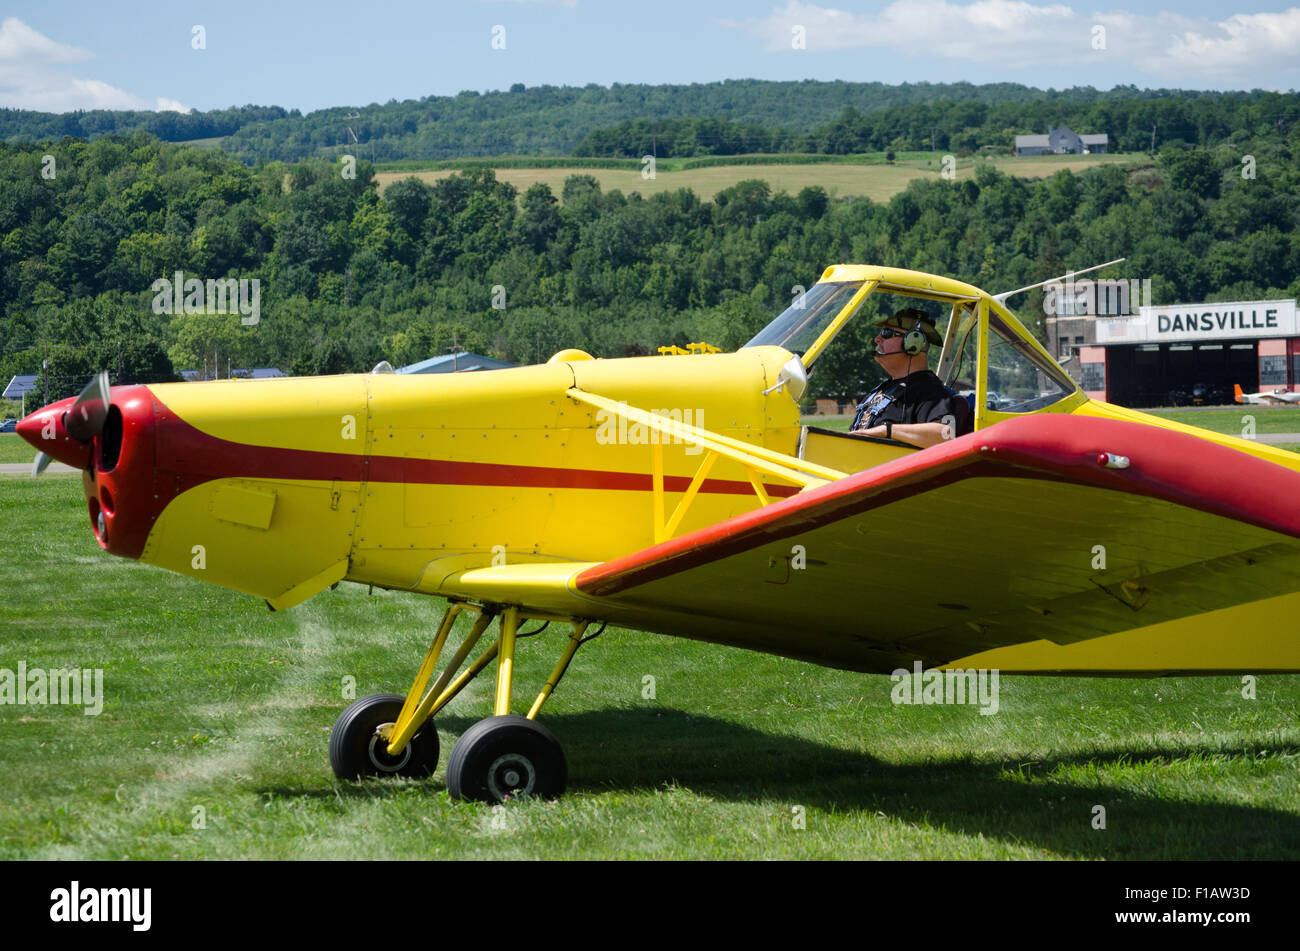 Tow plane being positioned to take next sailplane into air. Stock Photo